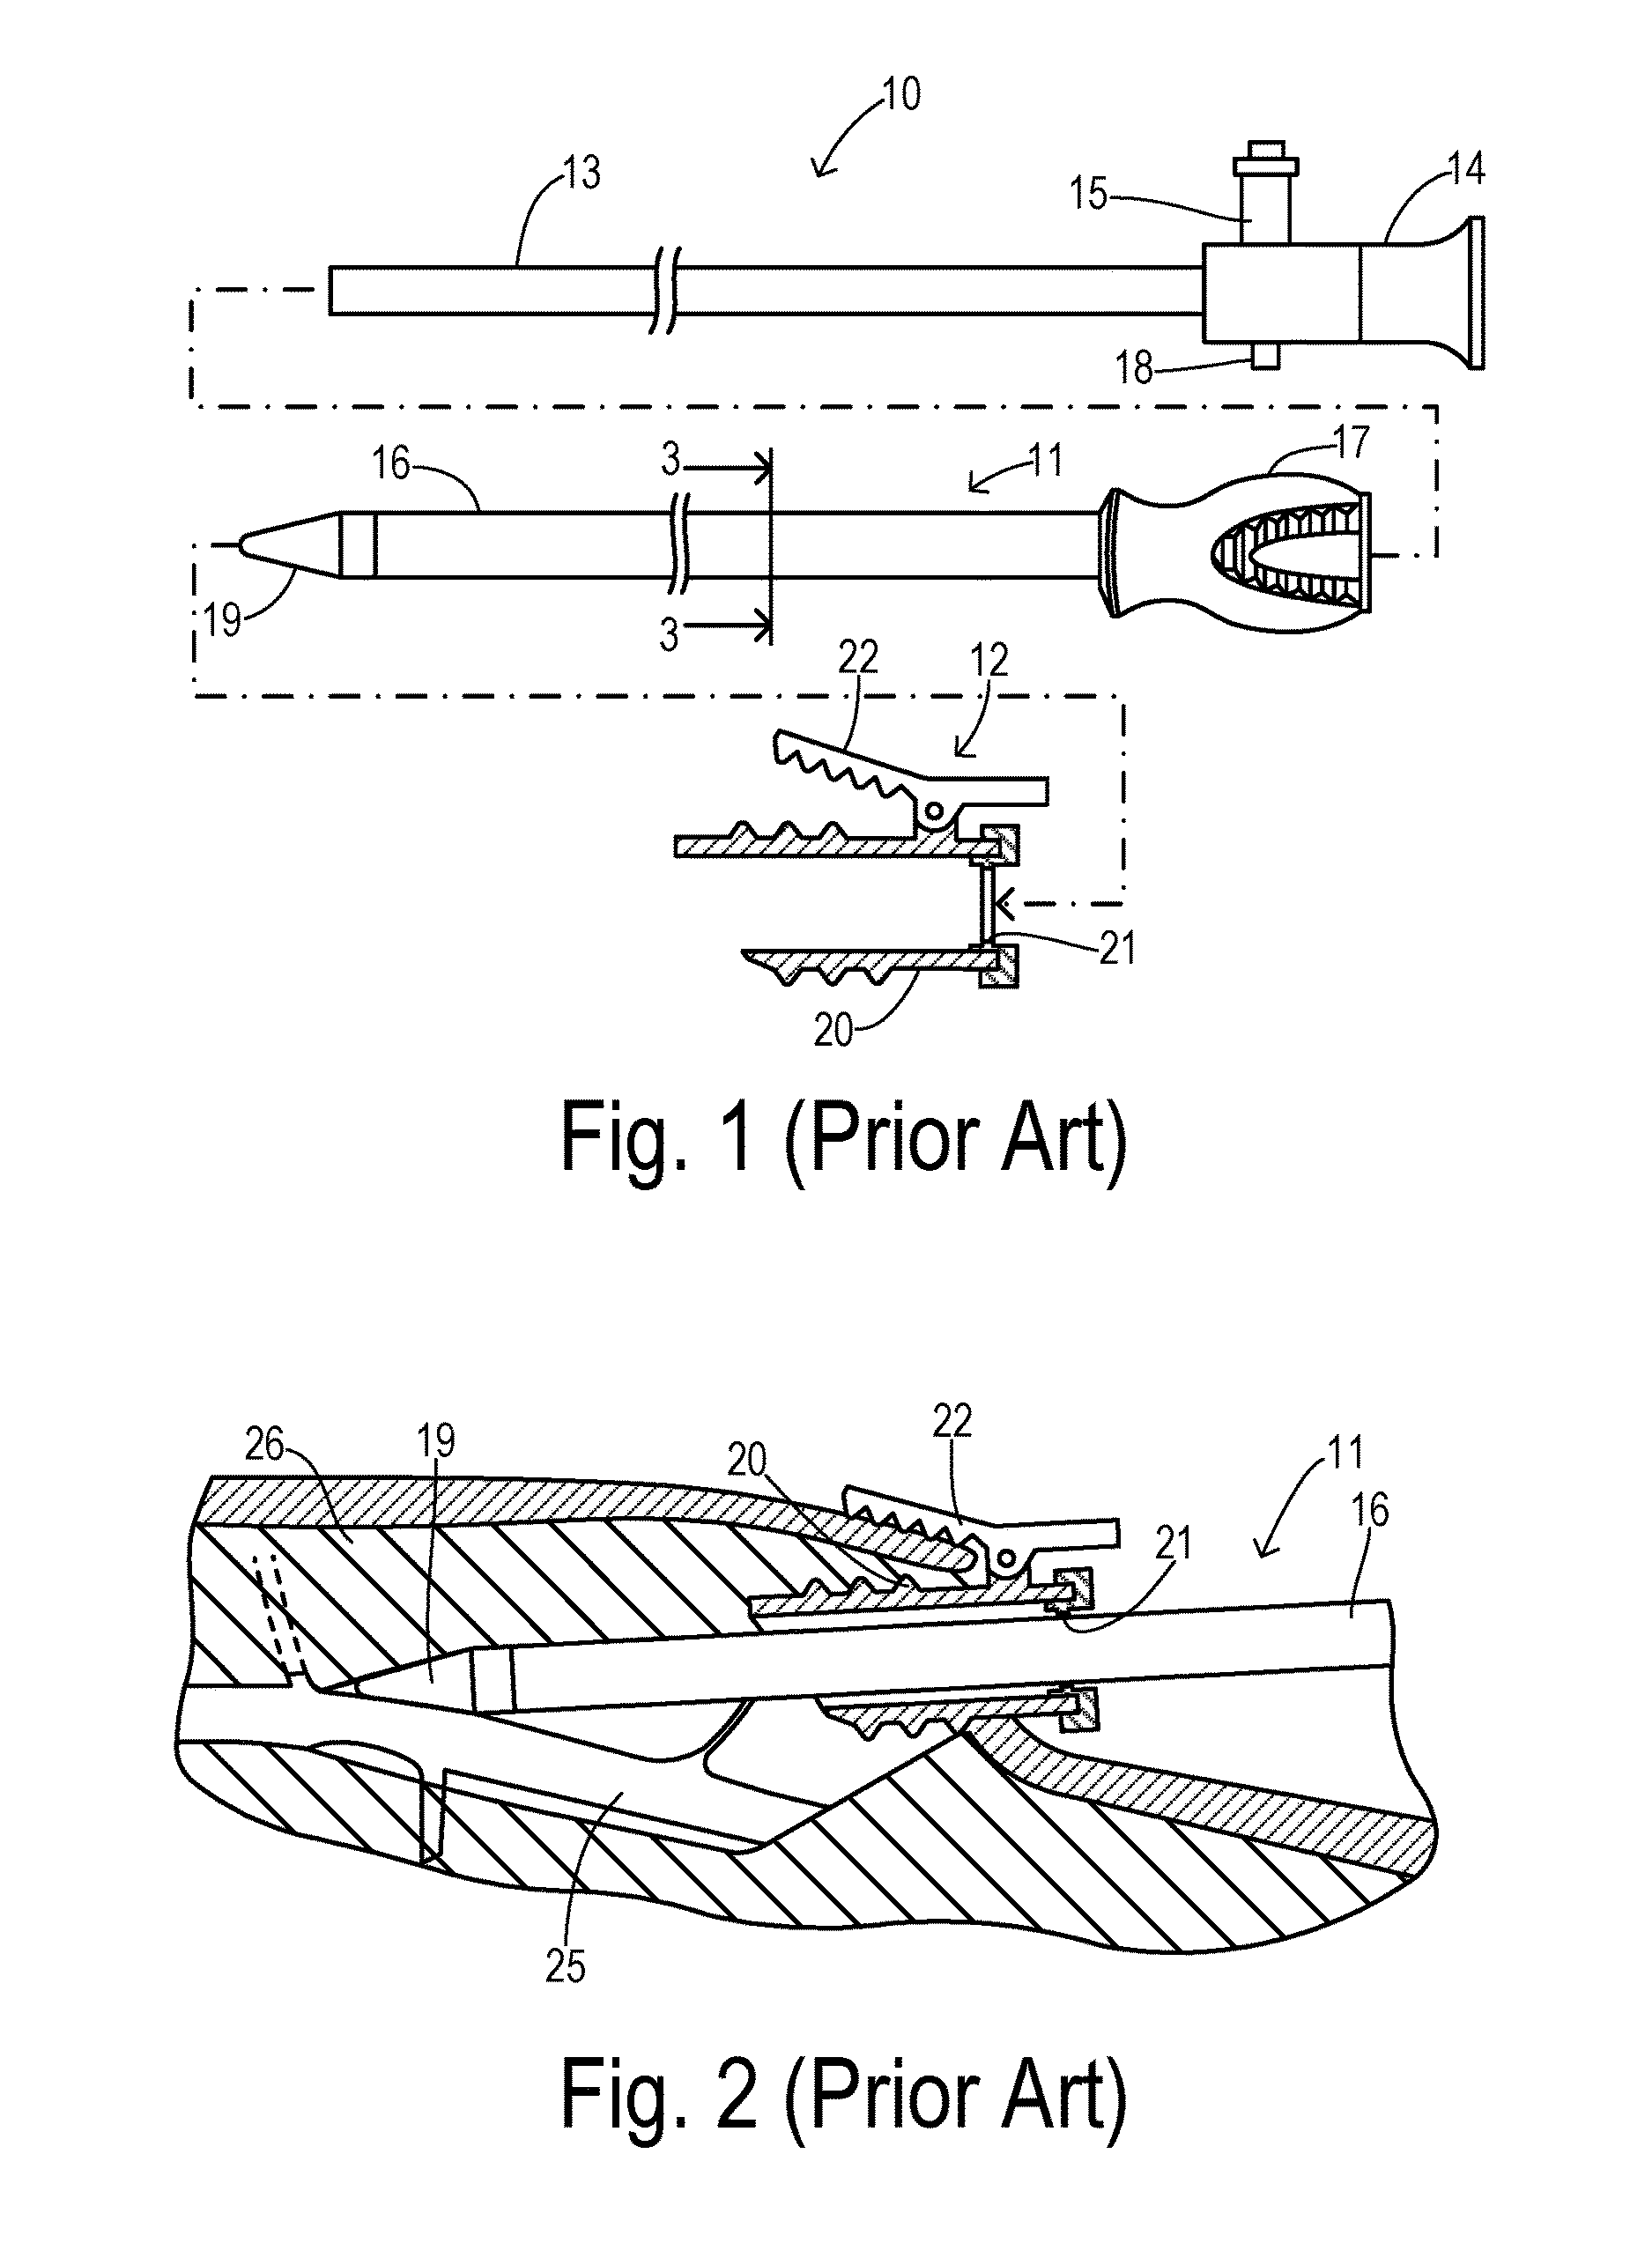 Endoscopic vessel harvester with blunt and active dissection